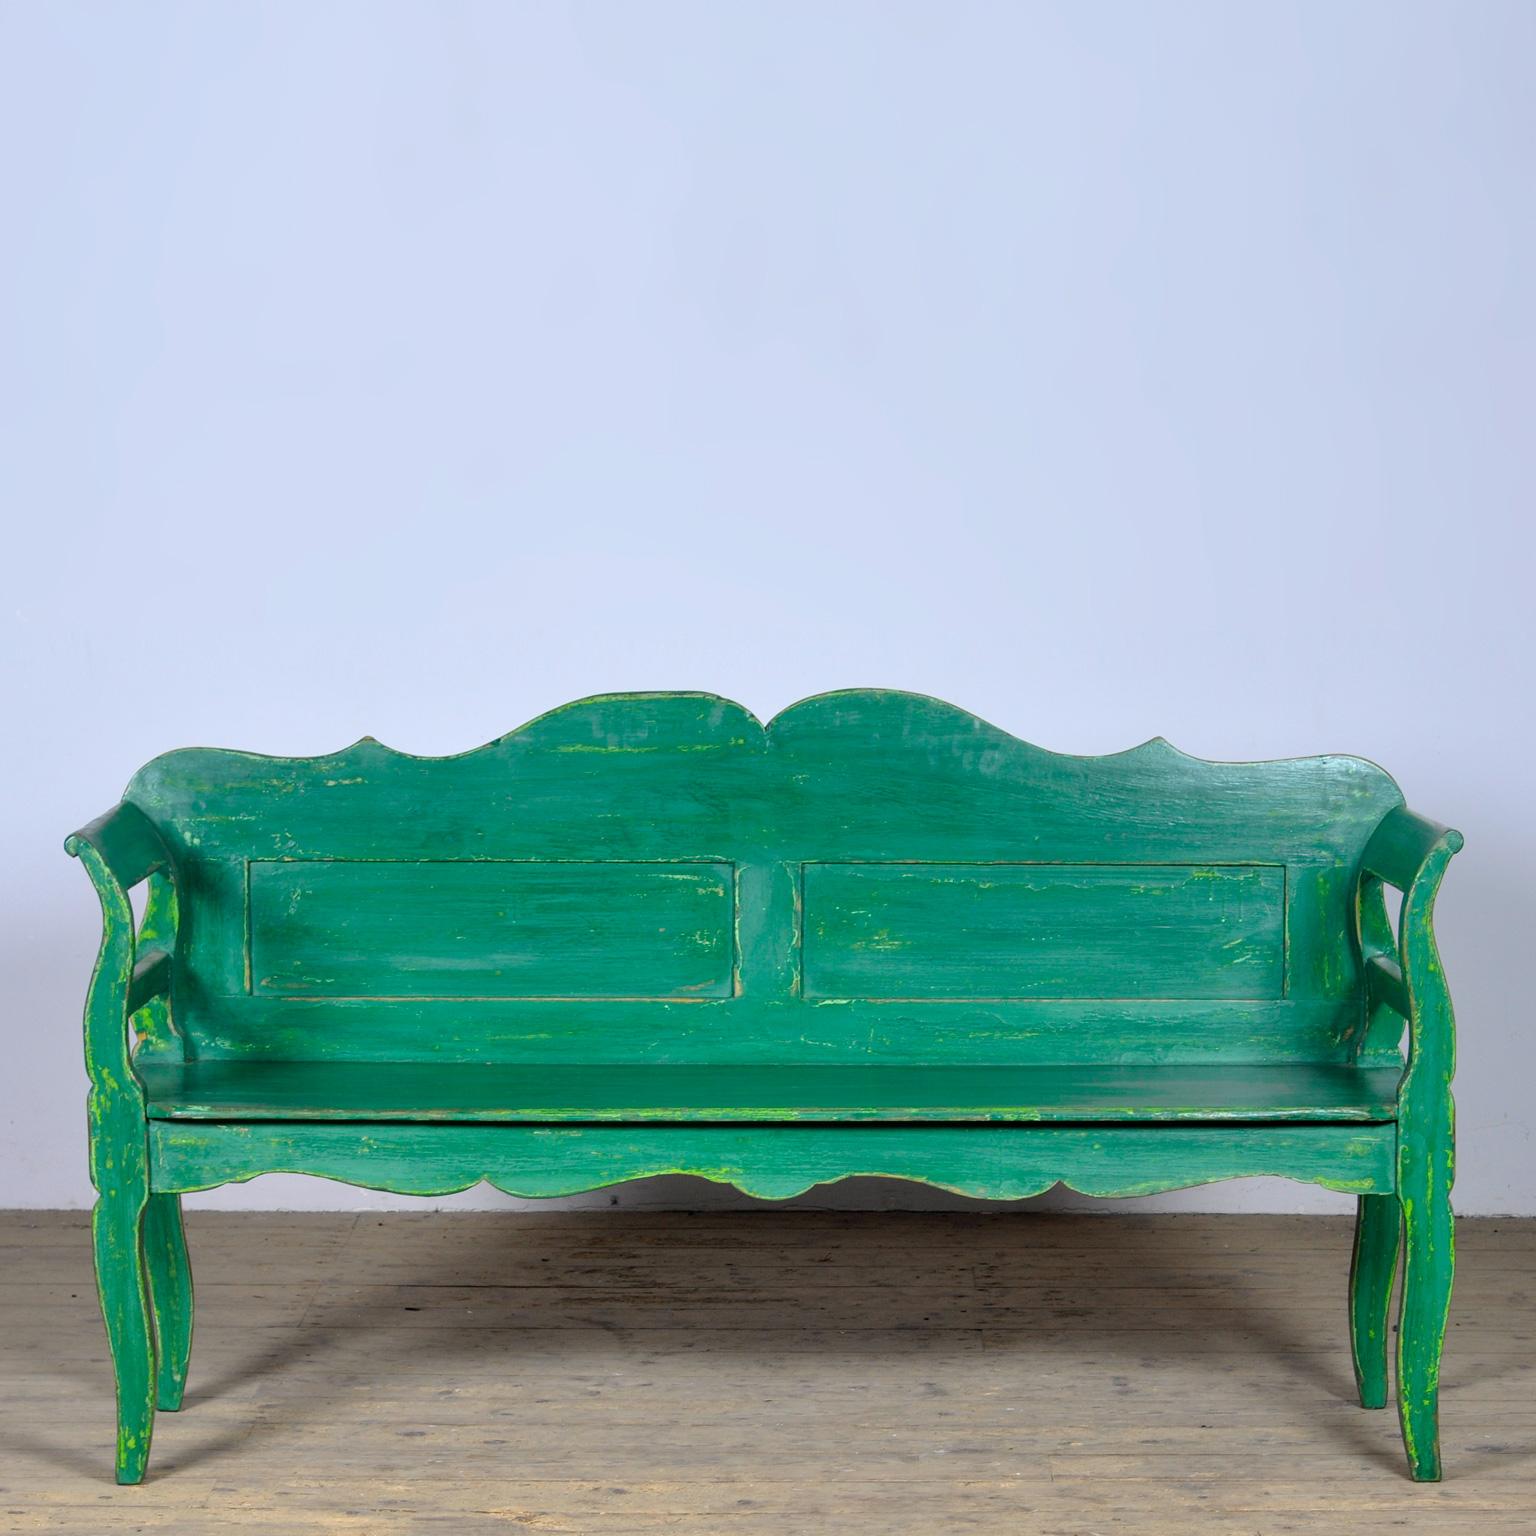 A charming bench from hungary with the original paint. Over time and use, the green paint has been worn away in places to the wood. The bench is stable and sturdy. Free of woodworm. 